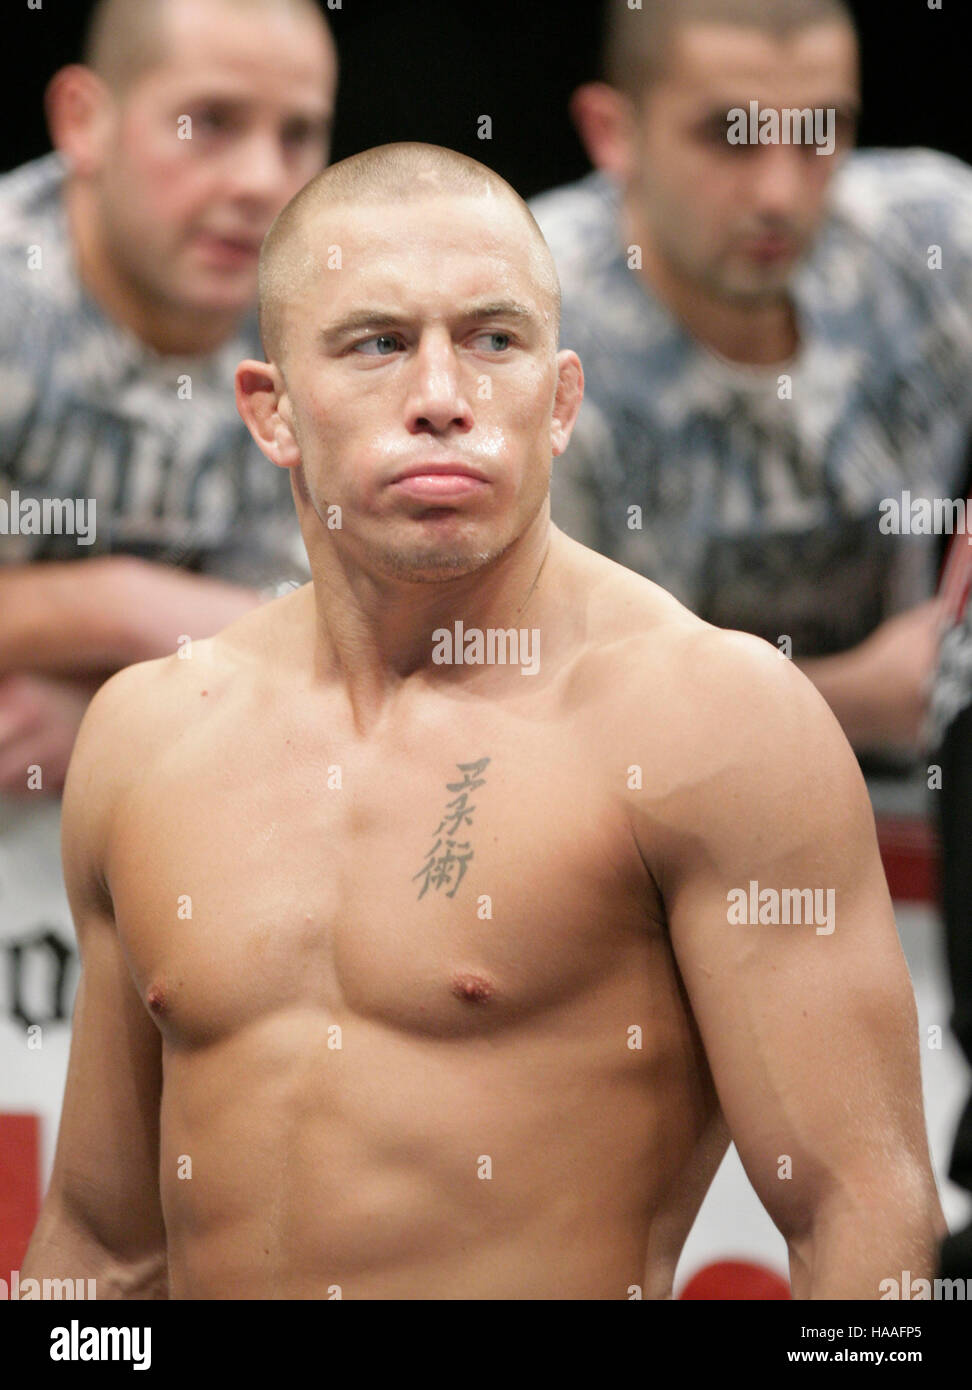 Georges St. Pierre before his fight with Matt Hughes during UFC 79 at the  Mandalay Bay Events Center in Las Vegas on Saturday, December 29, 2007.  Photo credit: Francis Specker Stock Photo - Alamy